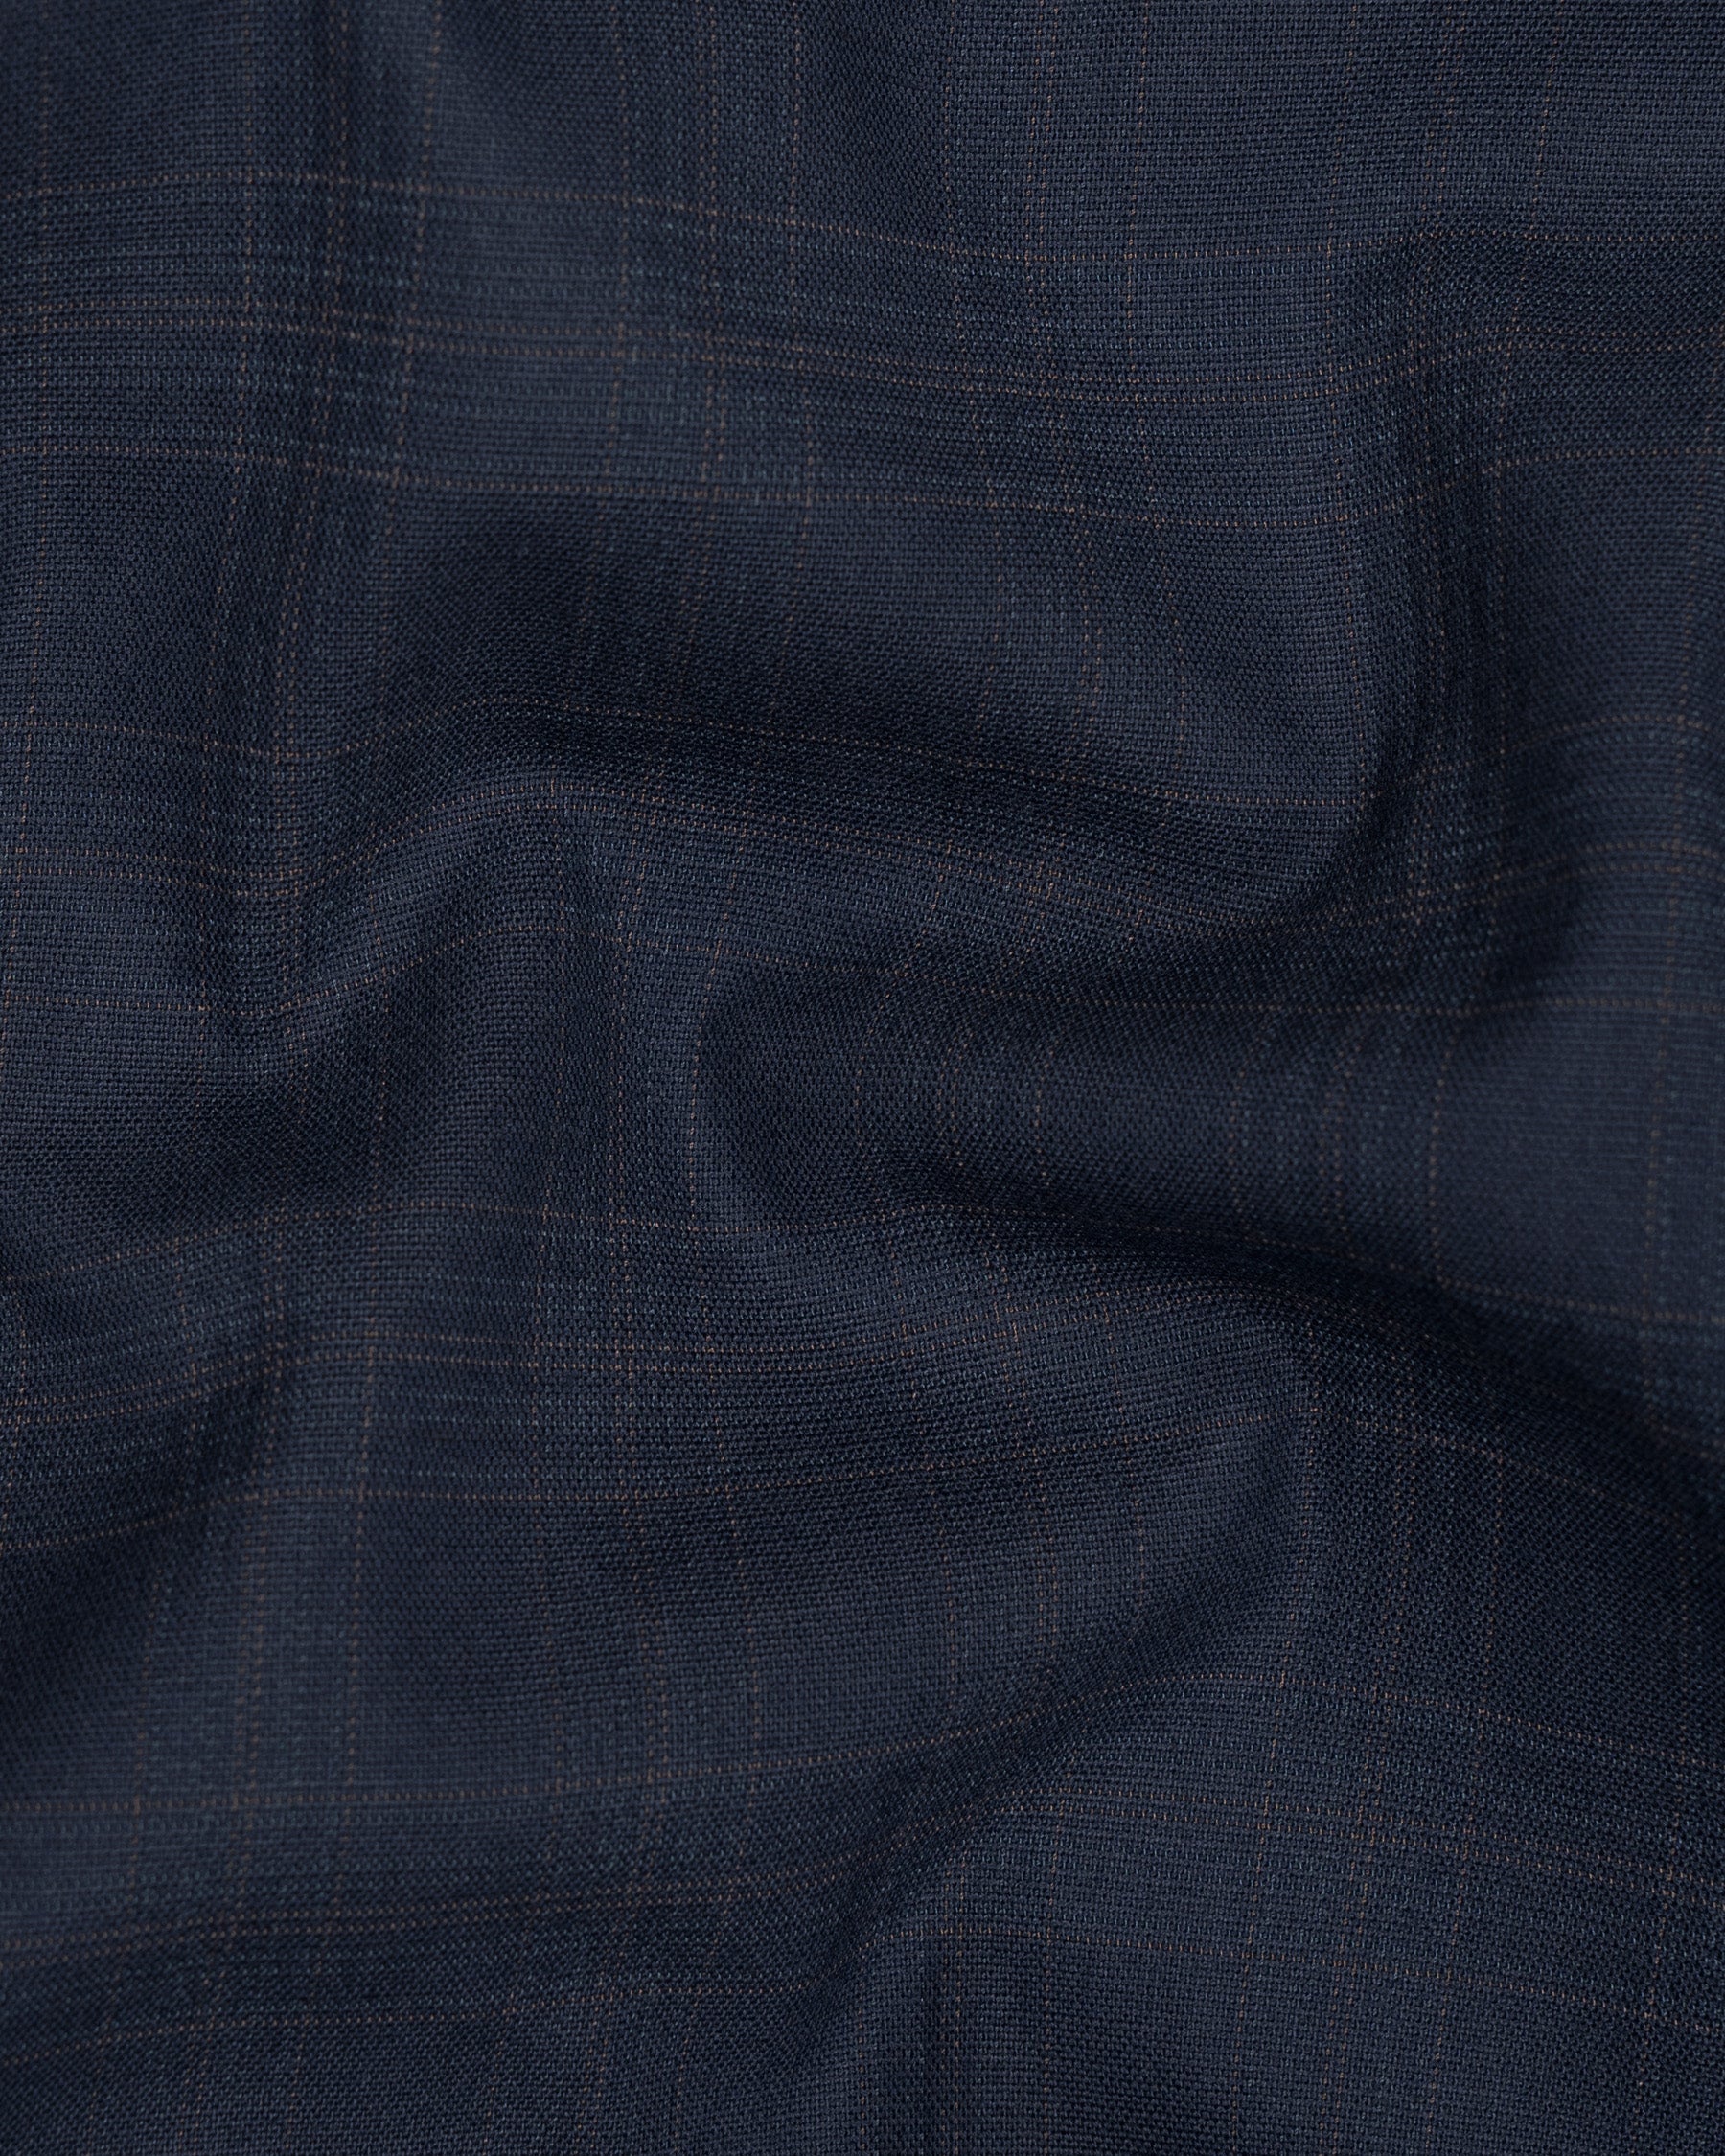 Charade Blue Plaid Double Breasted Wool Rich Suit